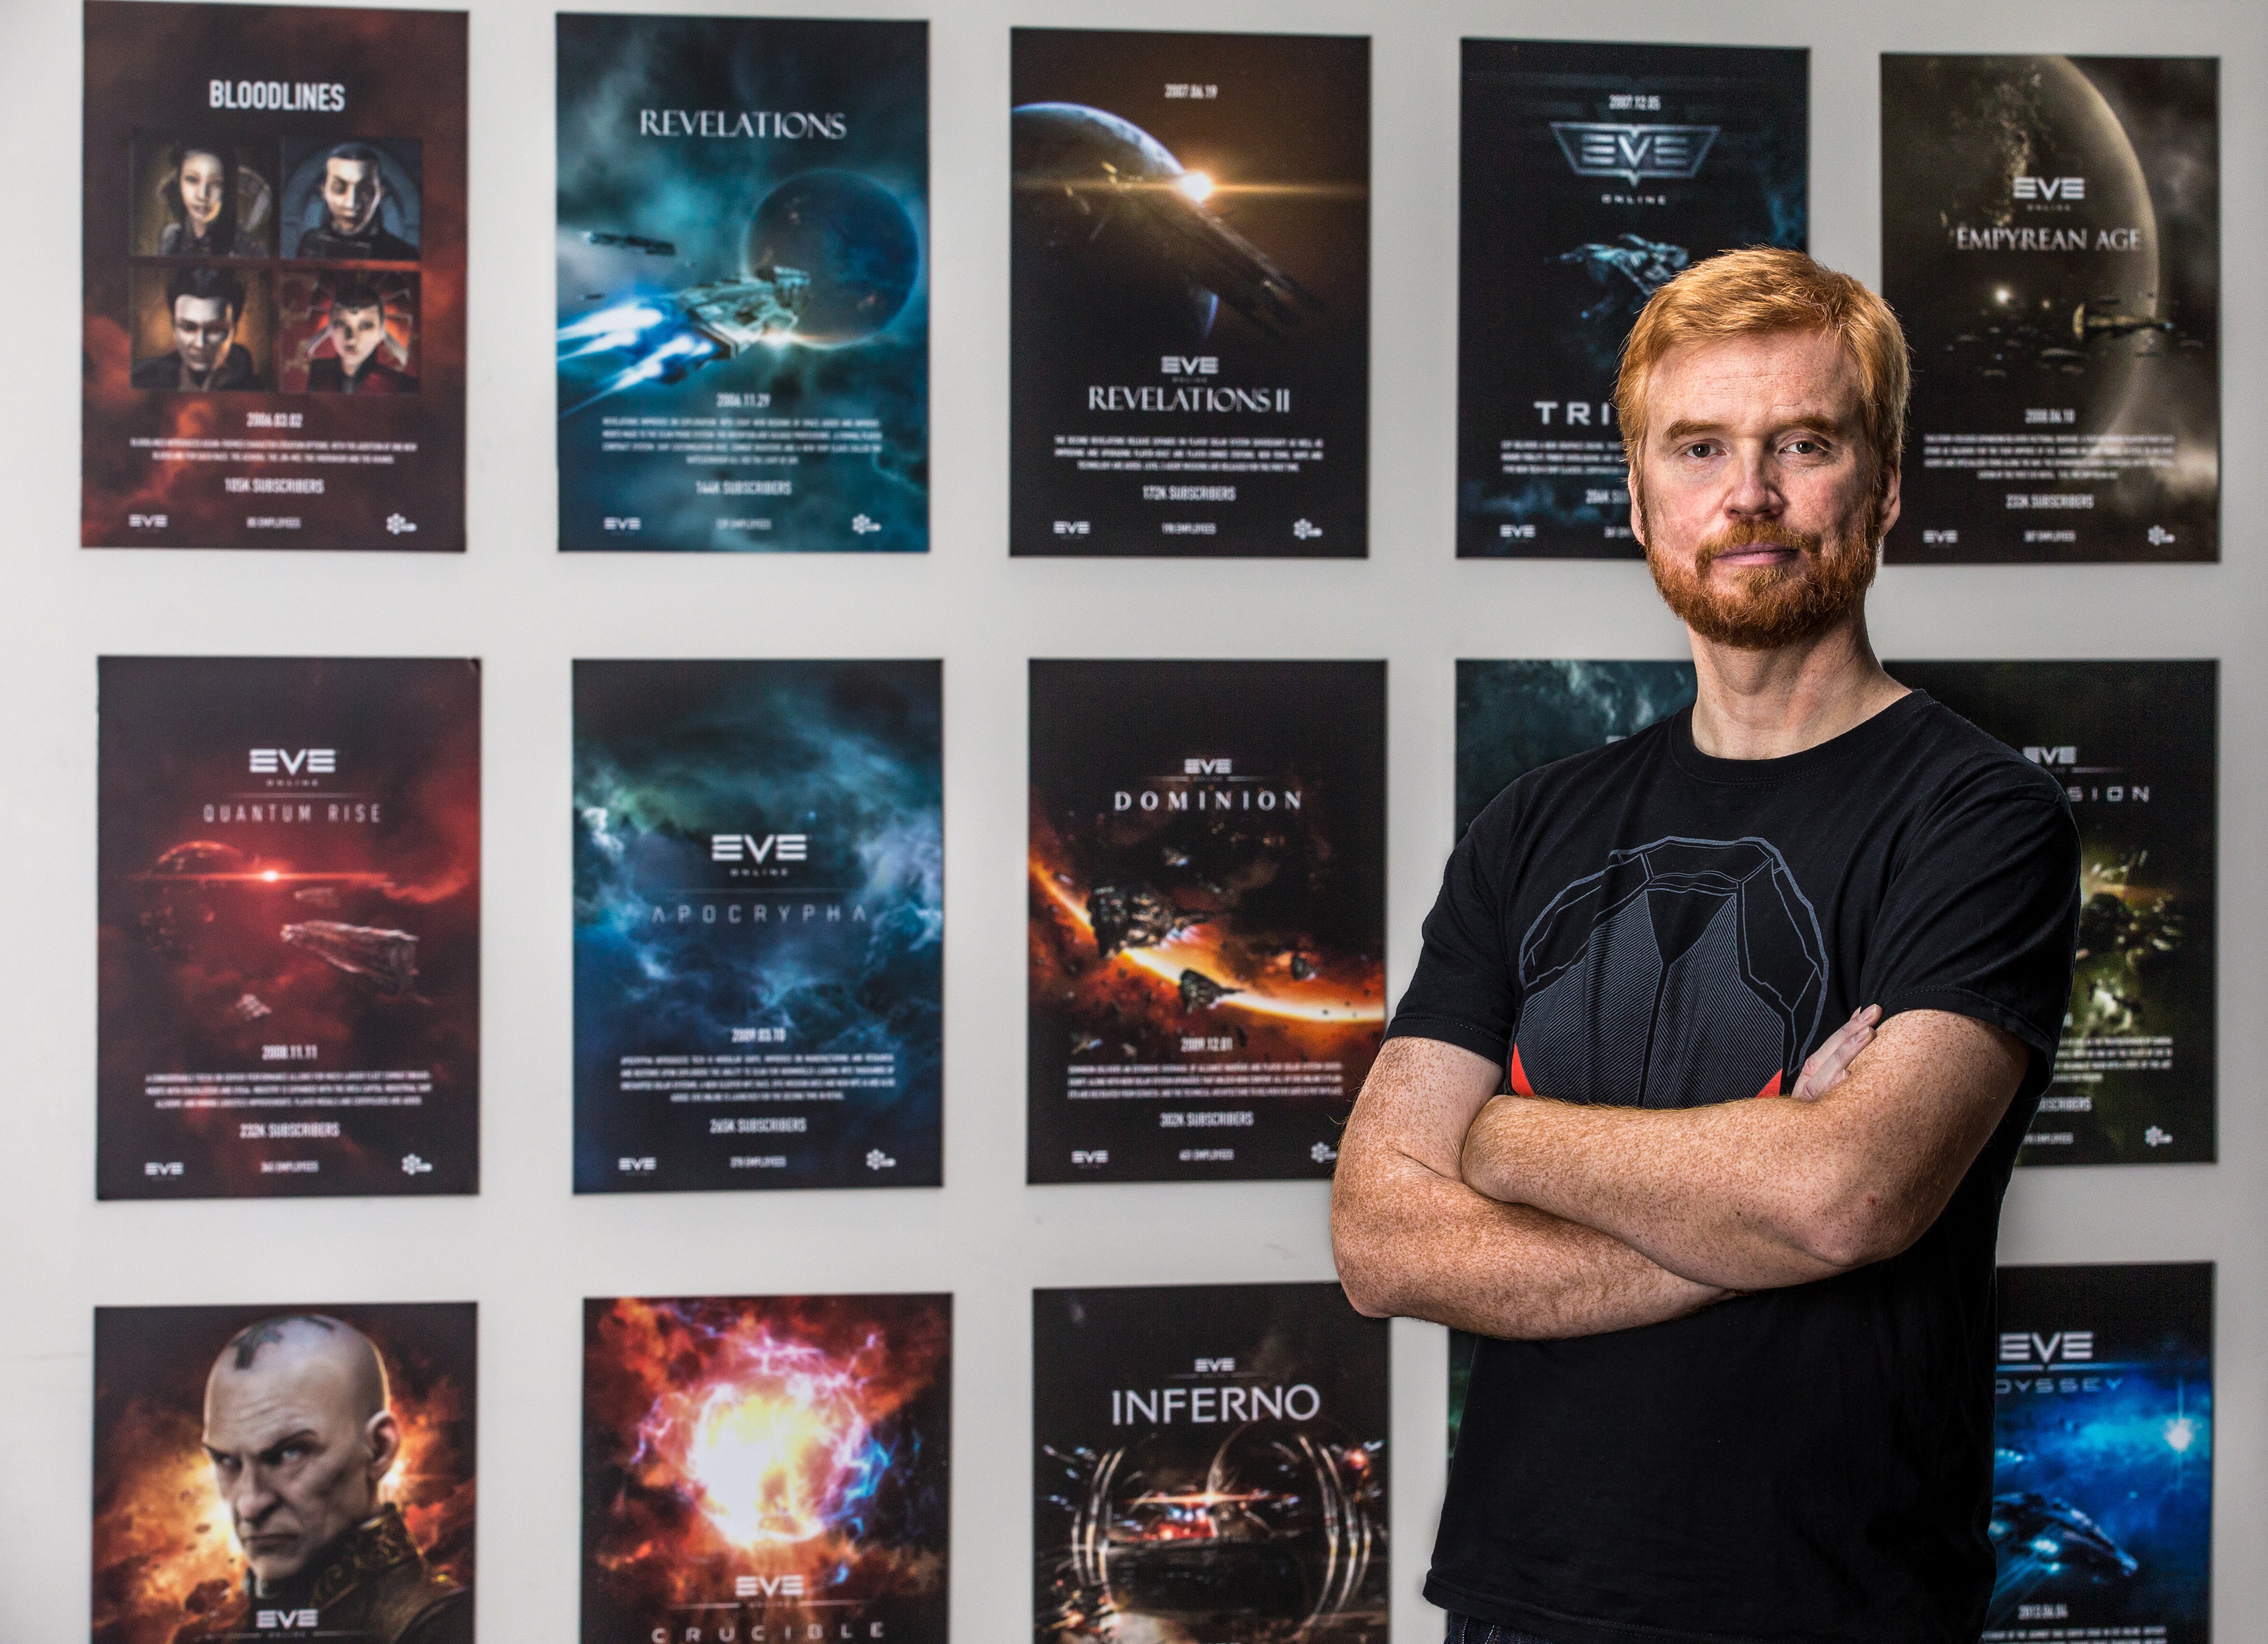 Image for EVE Online, Project Nova, and the future of CCP